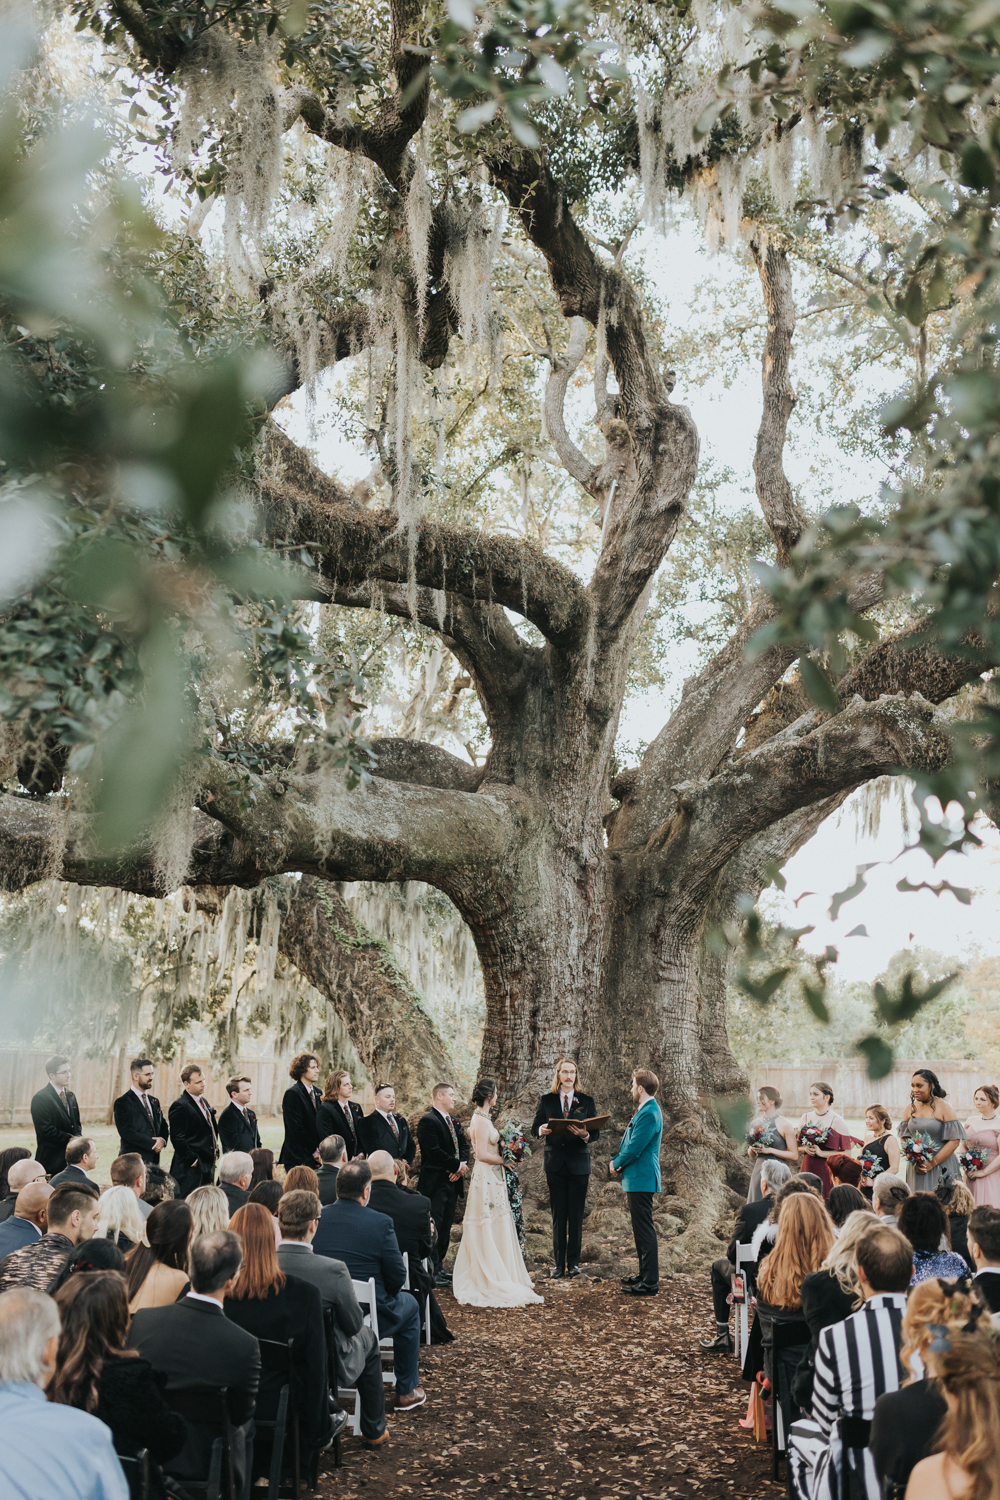 Wedding Ceremony at the Tree of Life in Audubon Park